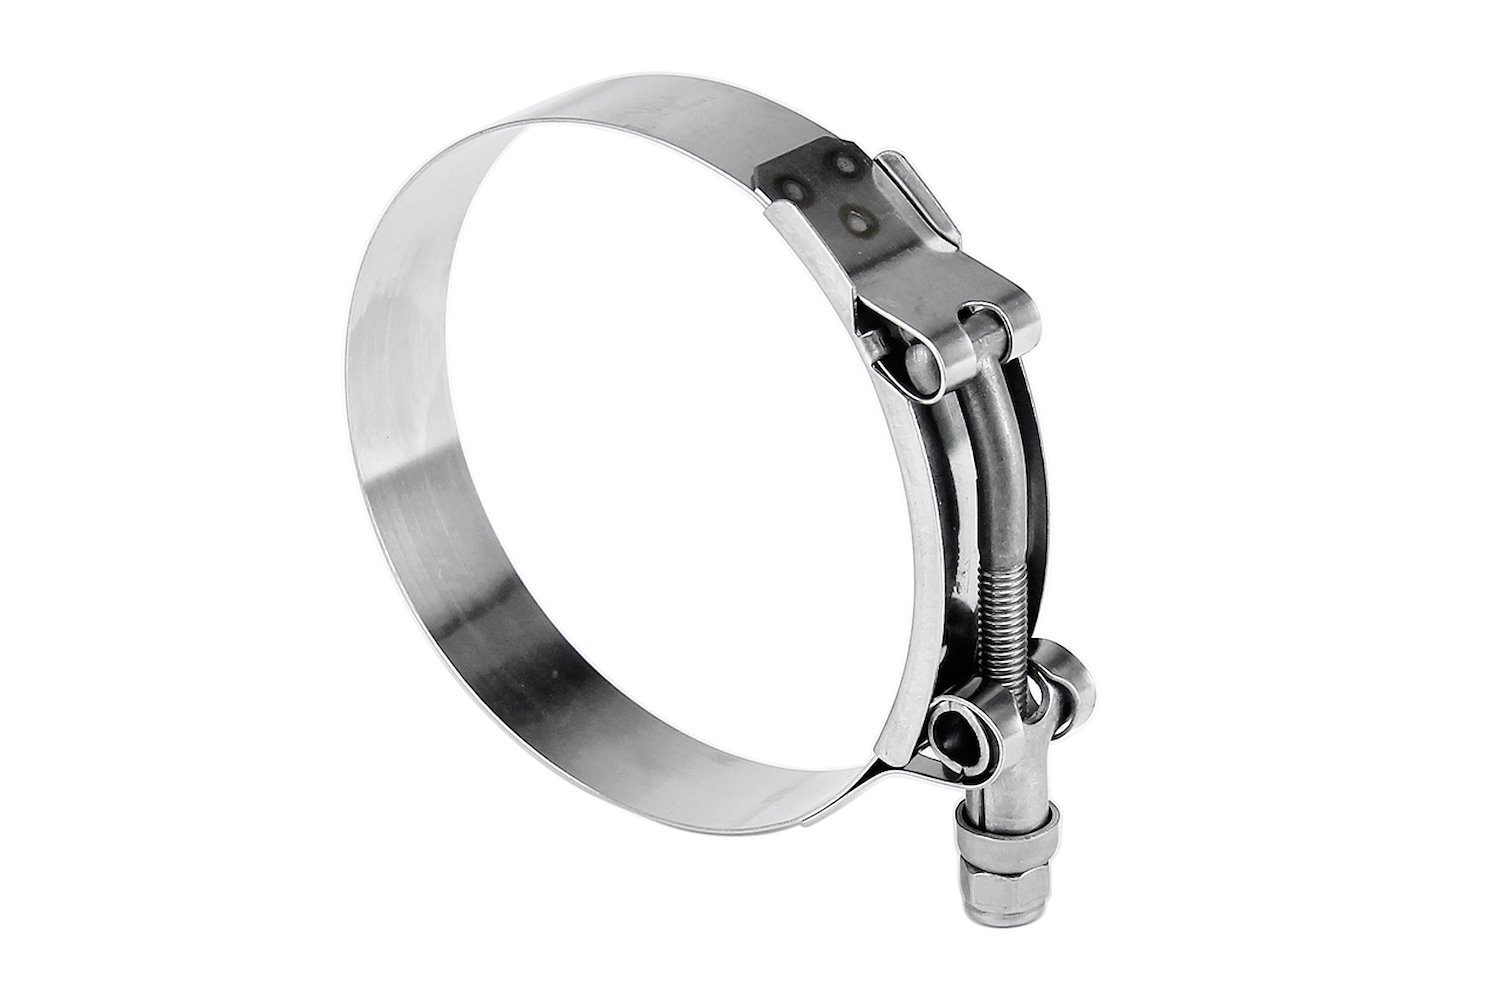 316-SSTC-76-84 100-Percent Marine Grade Stainless Steel T-Bolt Hose Clamp, Size #68, Range: 3 in.- 3.31 in.